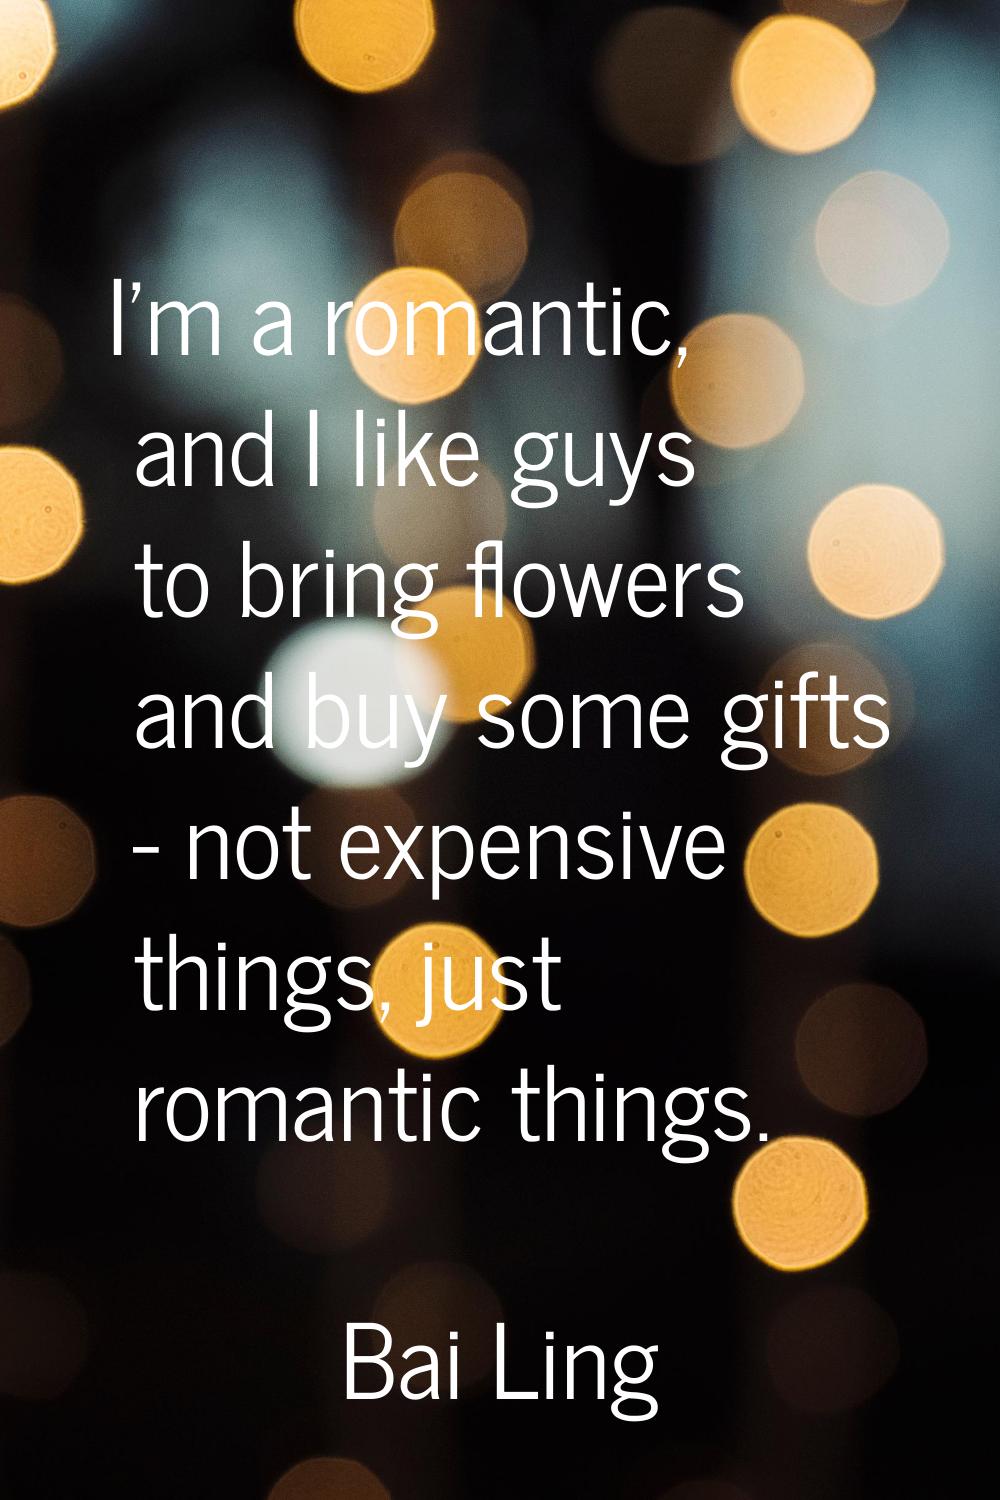 I'm a romantic, and I like guys to bring flowers and buy some gifts - not expensive things, just ro